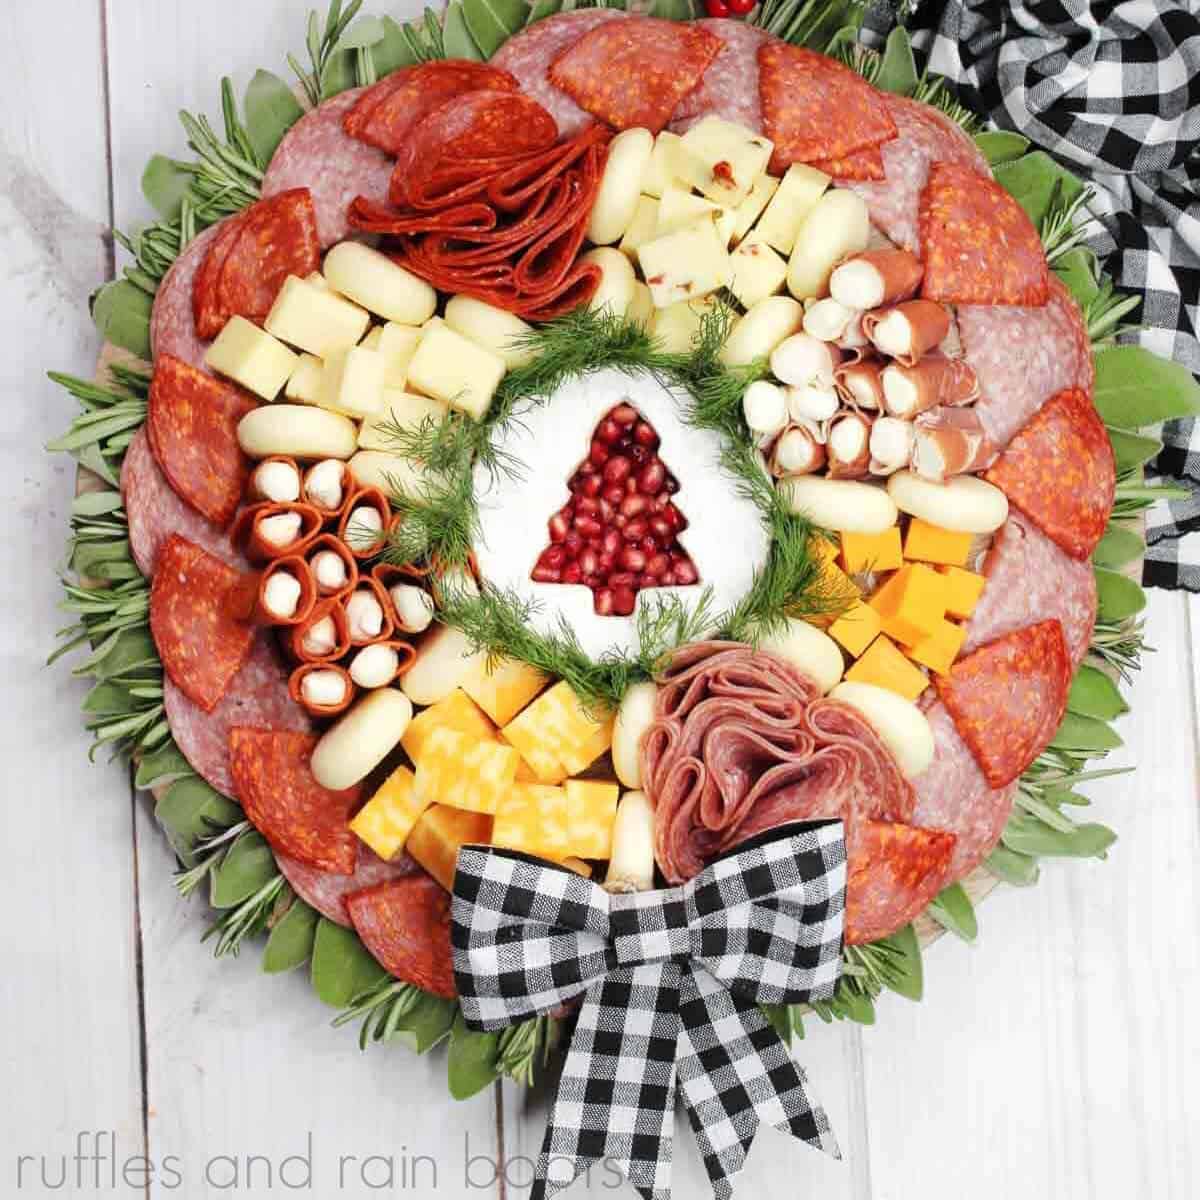 S overhead close up view of a holiday charcuterie board with a variety of meats and cheese with a black and white buffalo plaid bow on a white wood surface.